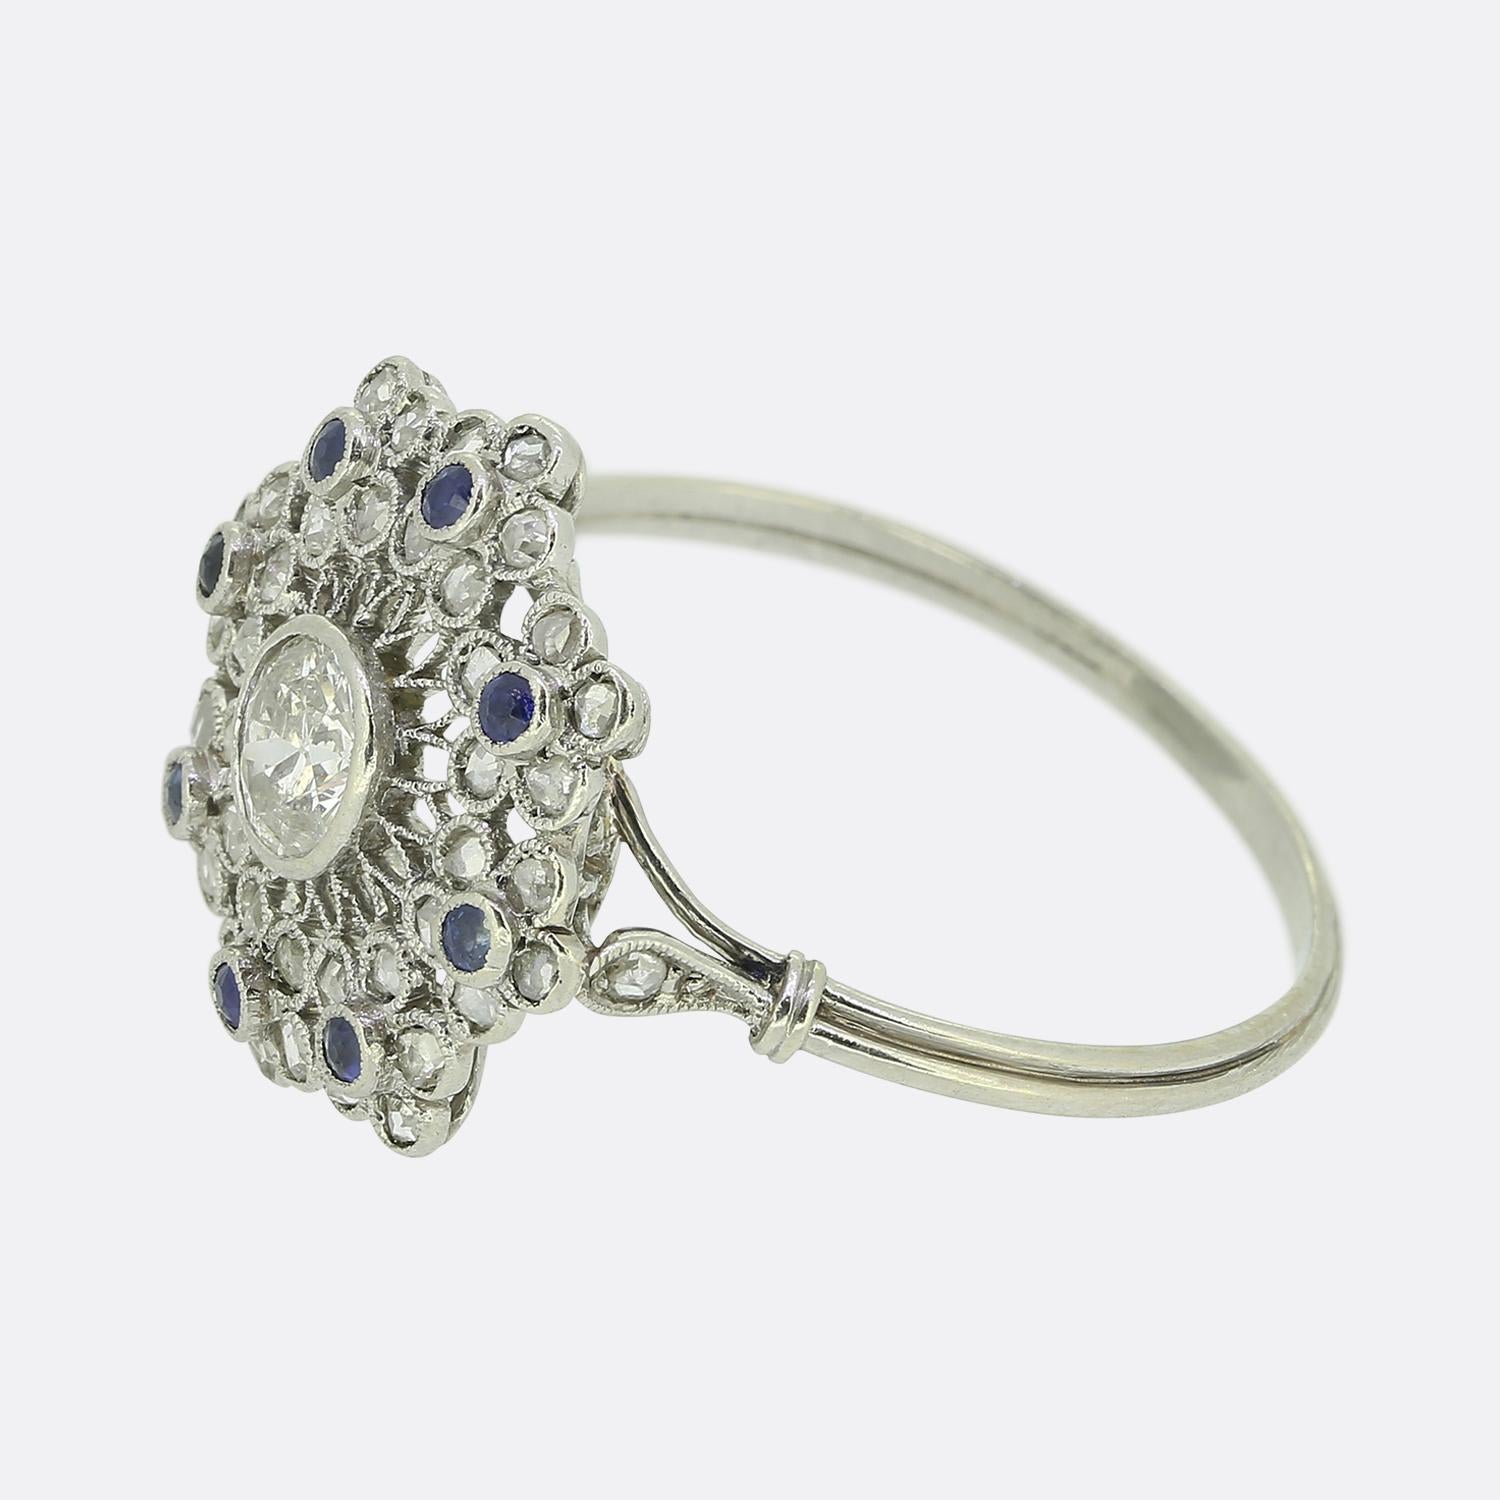 Here we have a wonderful sapphire and diamond cluster ring dating back to the pinnacle of the Art Deco movement. A single round faceted old European cut diamond sits slightly risen at the centre of the face atop an intricately crafted filigree